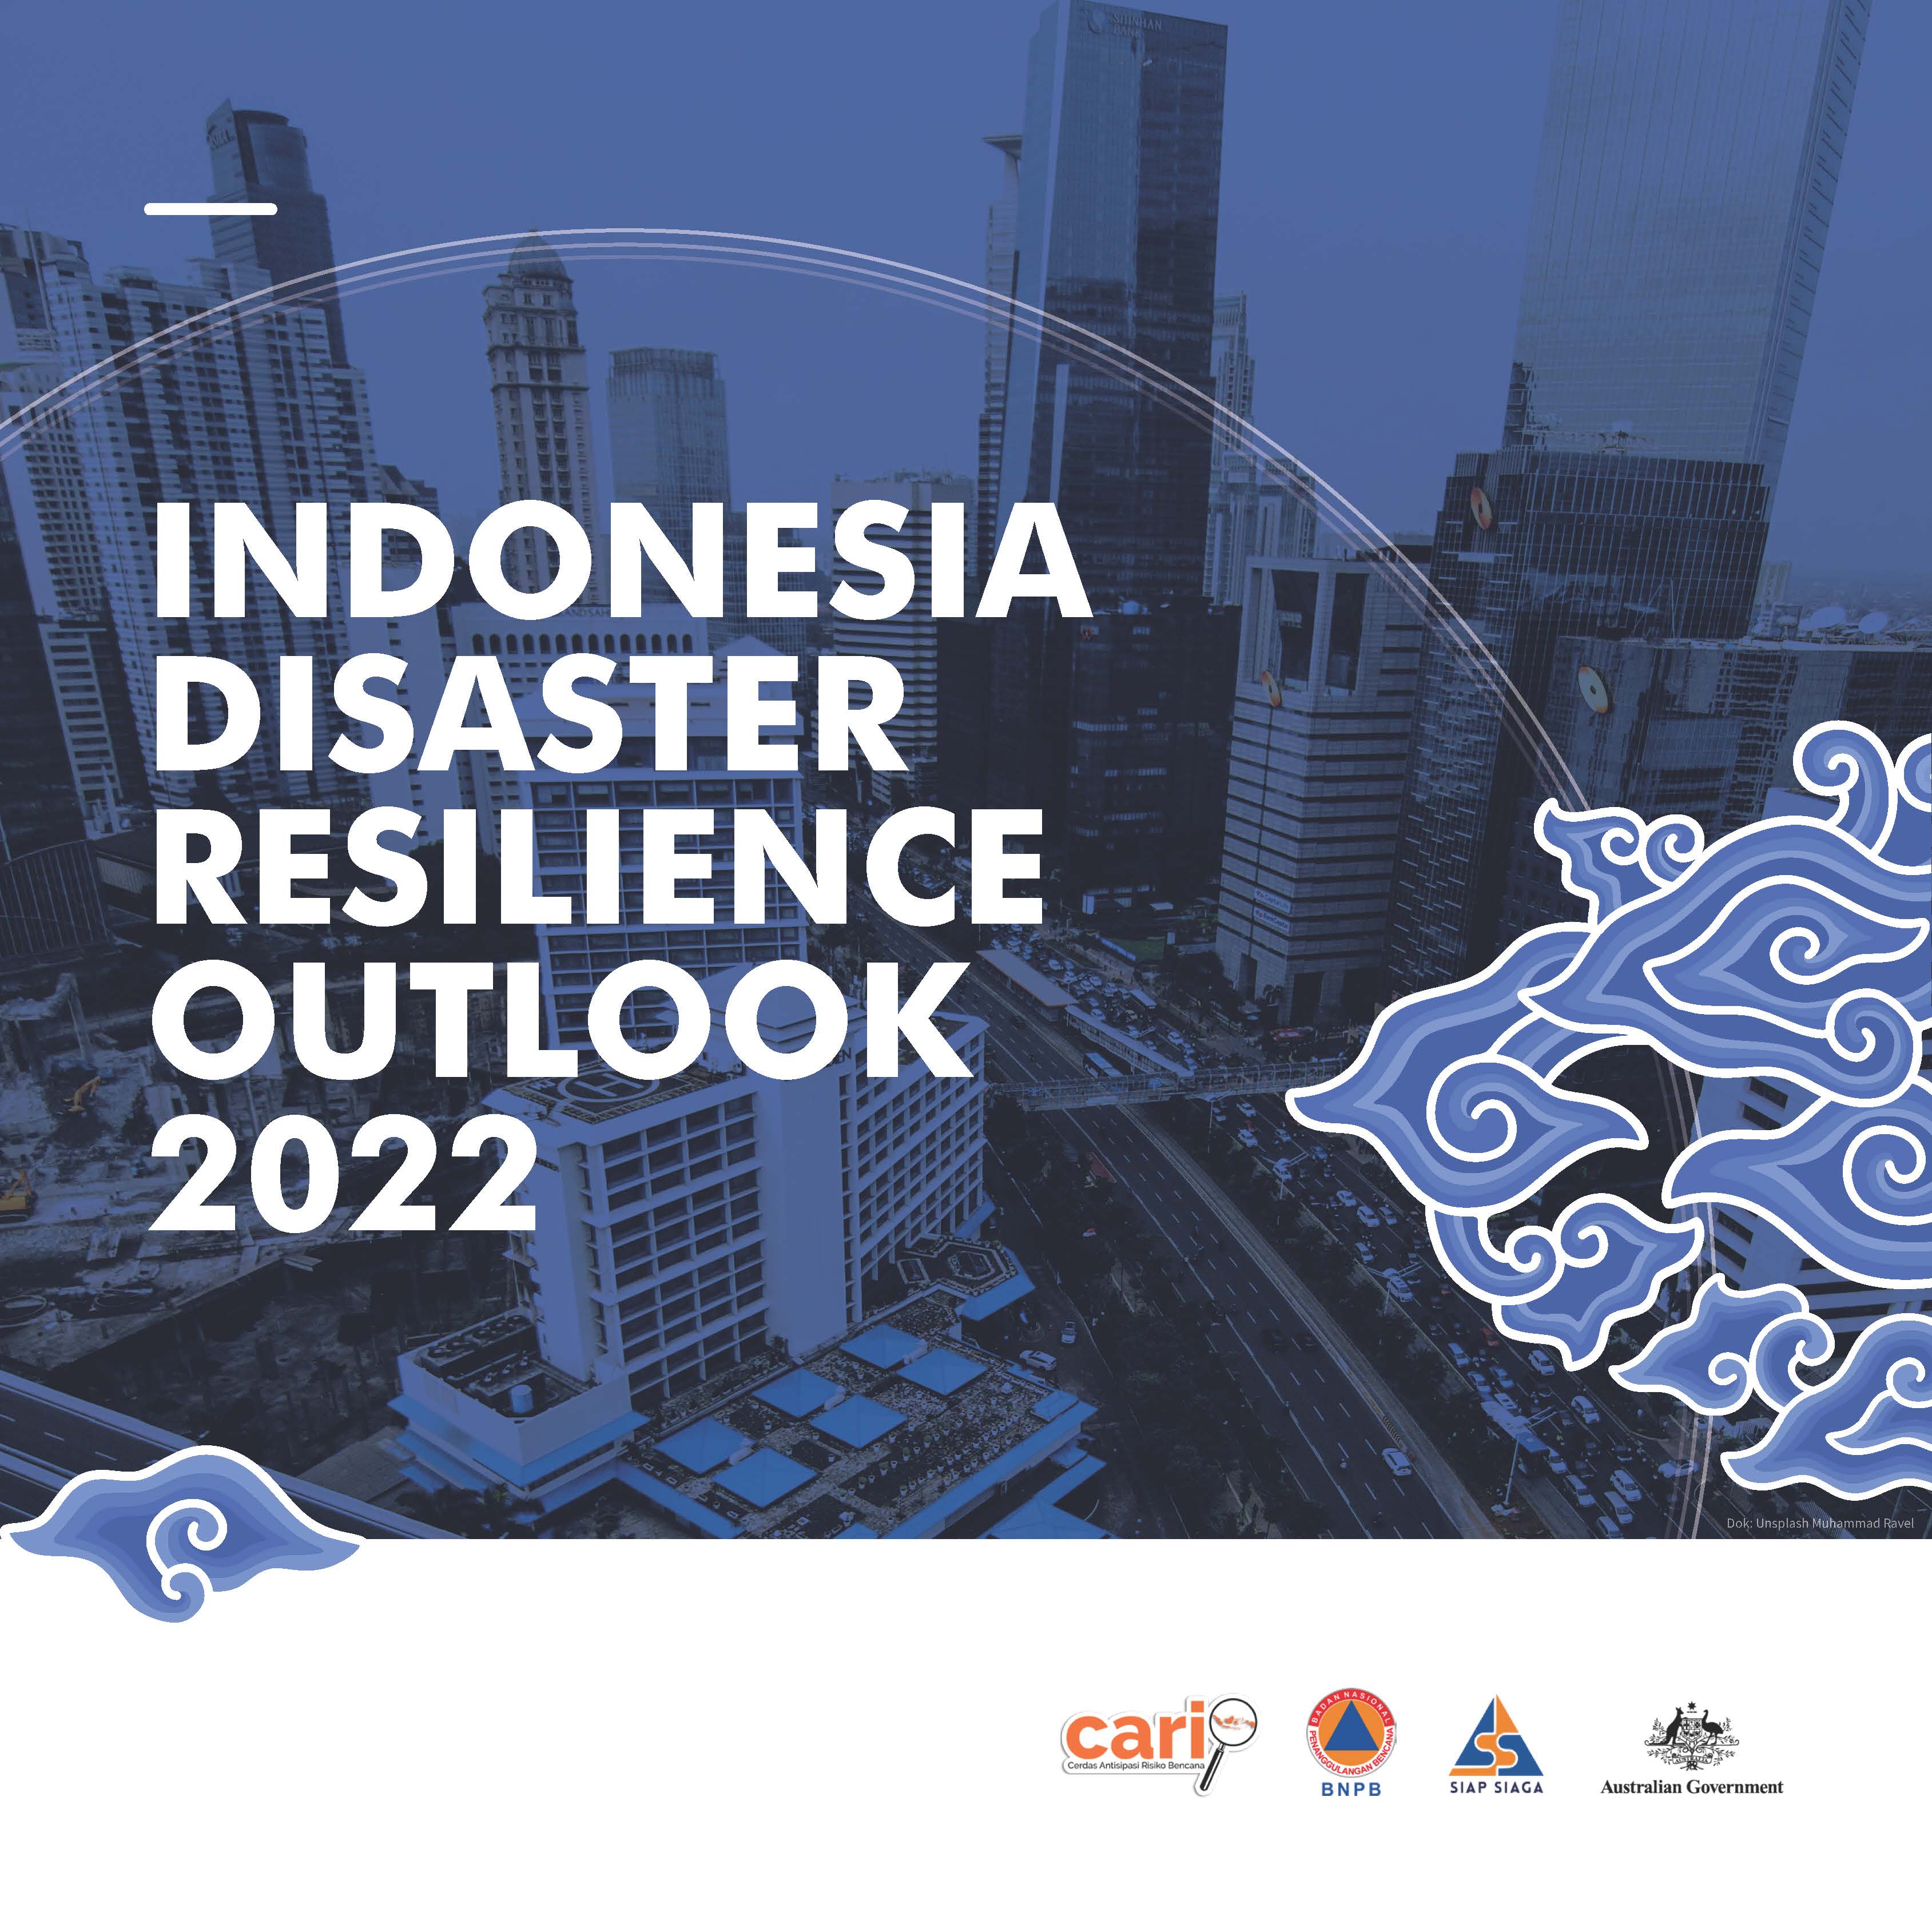 Indonesia Disaster Resilience Outlook 2022